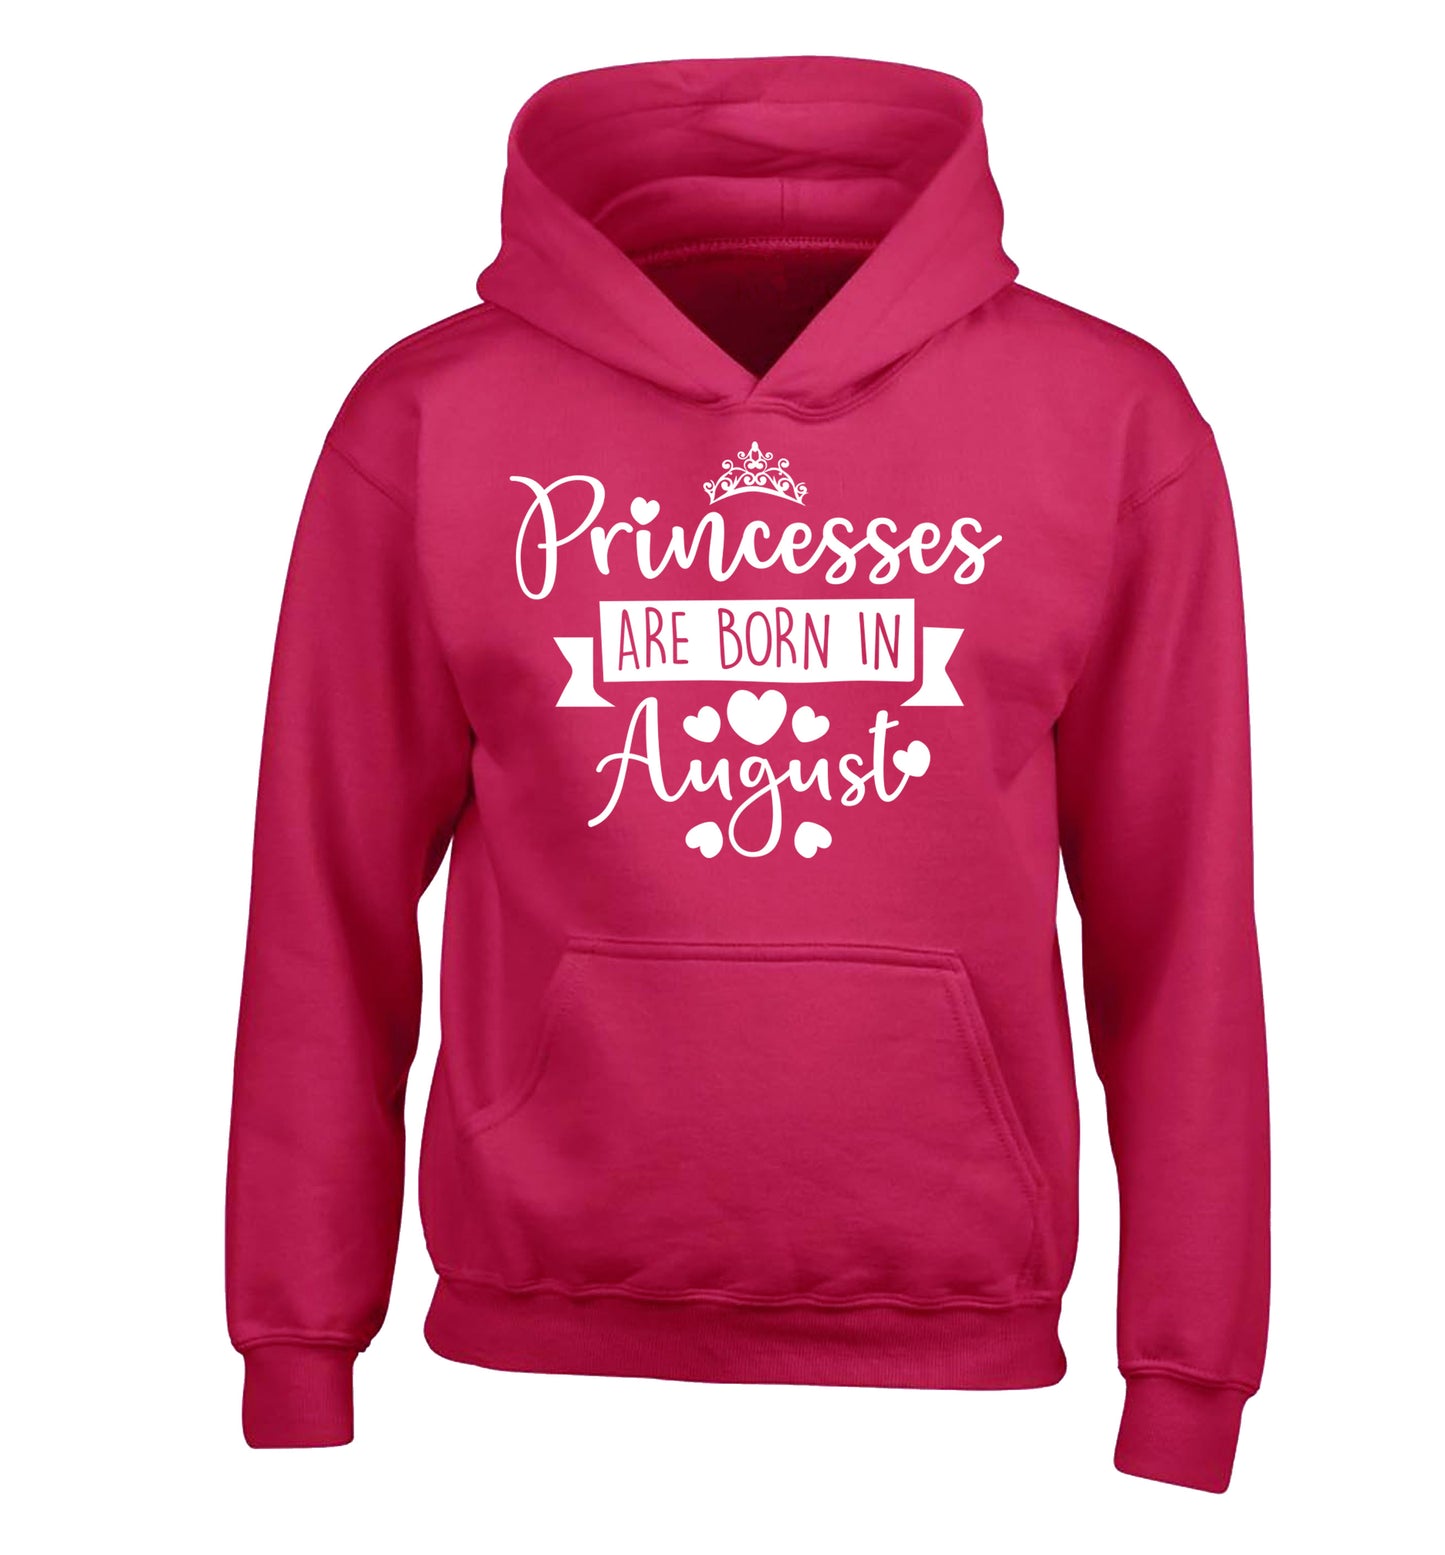 Princesses are born in August children's pink hoodie 12-13 Years